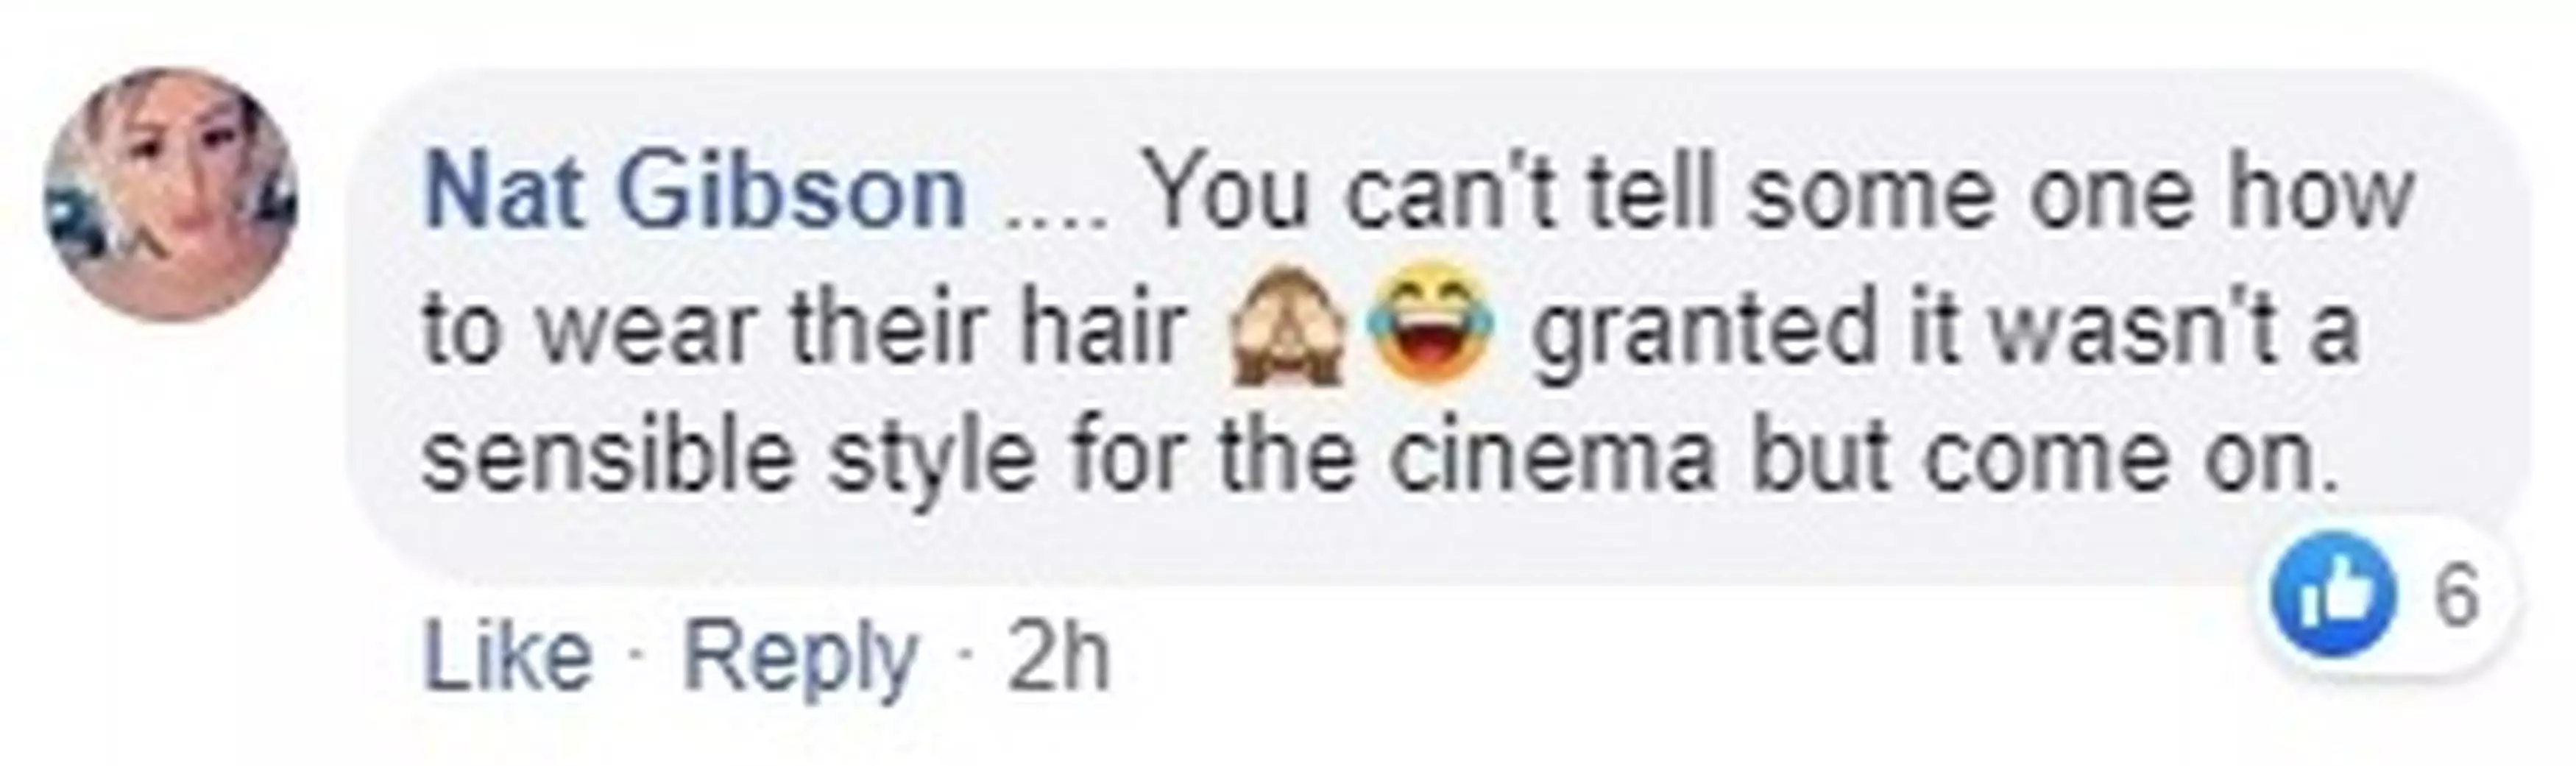 People told Ellie you cannot tell people how to wear their hair to the cinema (